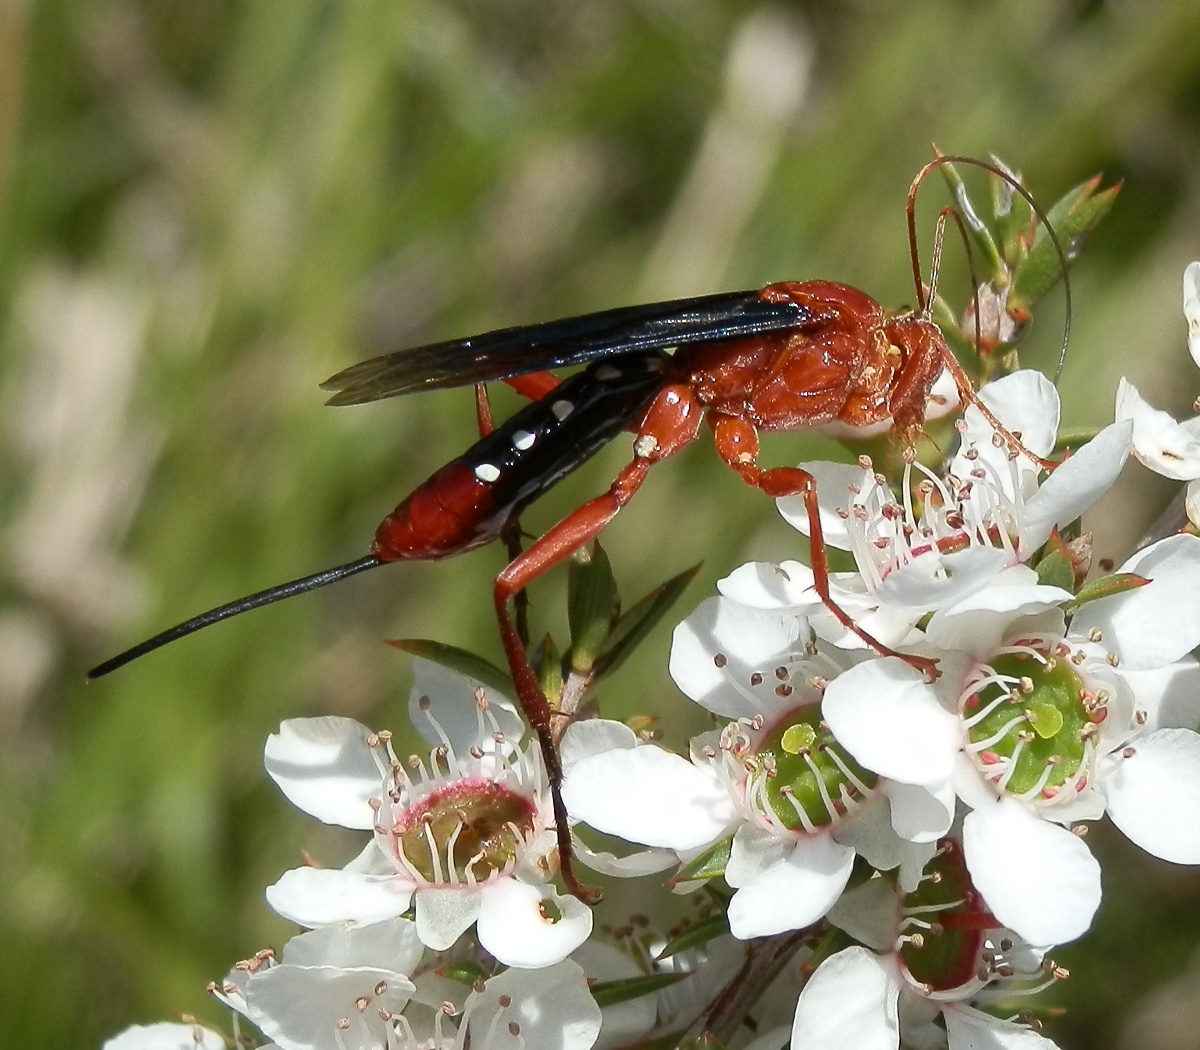 Orchid Dupe Wasp - female